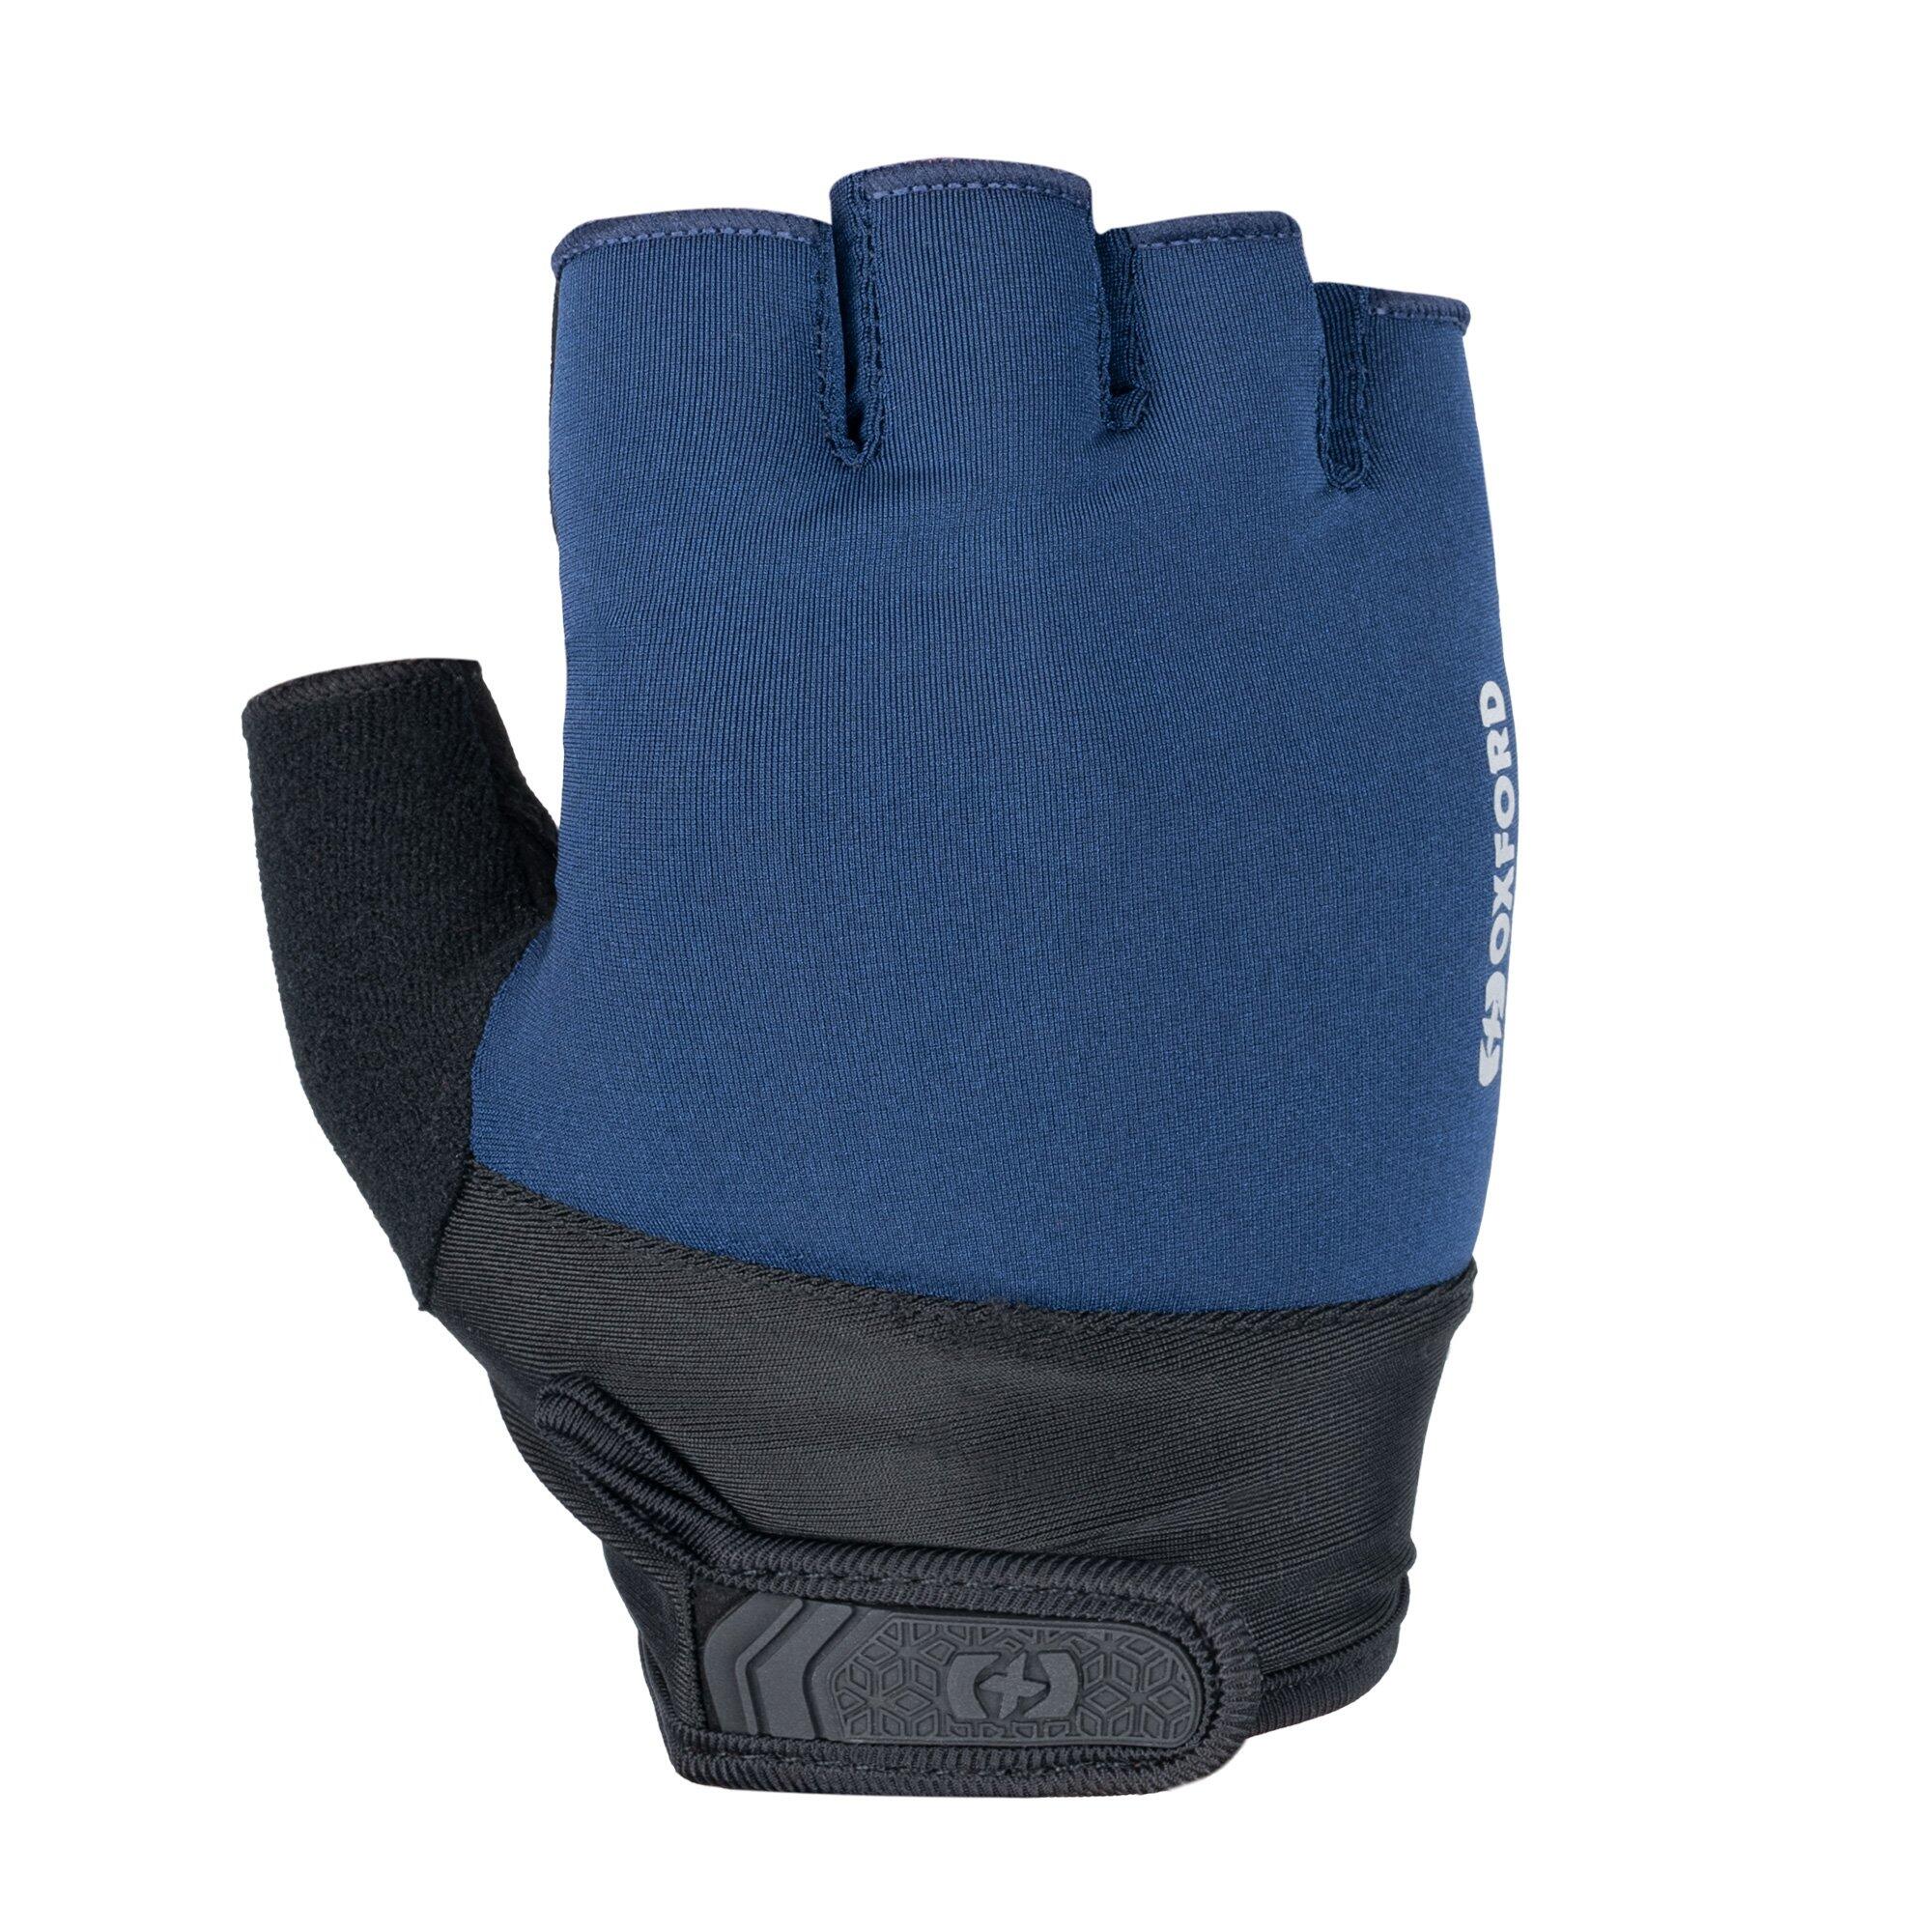 OXFORD Oxford Cadence 2.0 Mitts Blue S